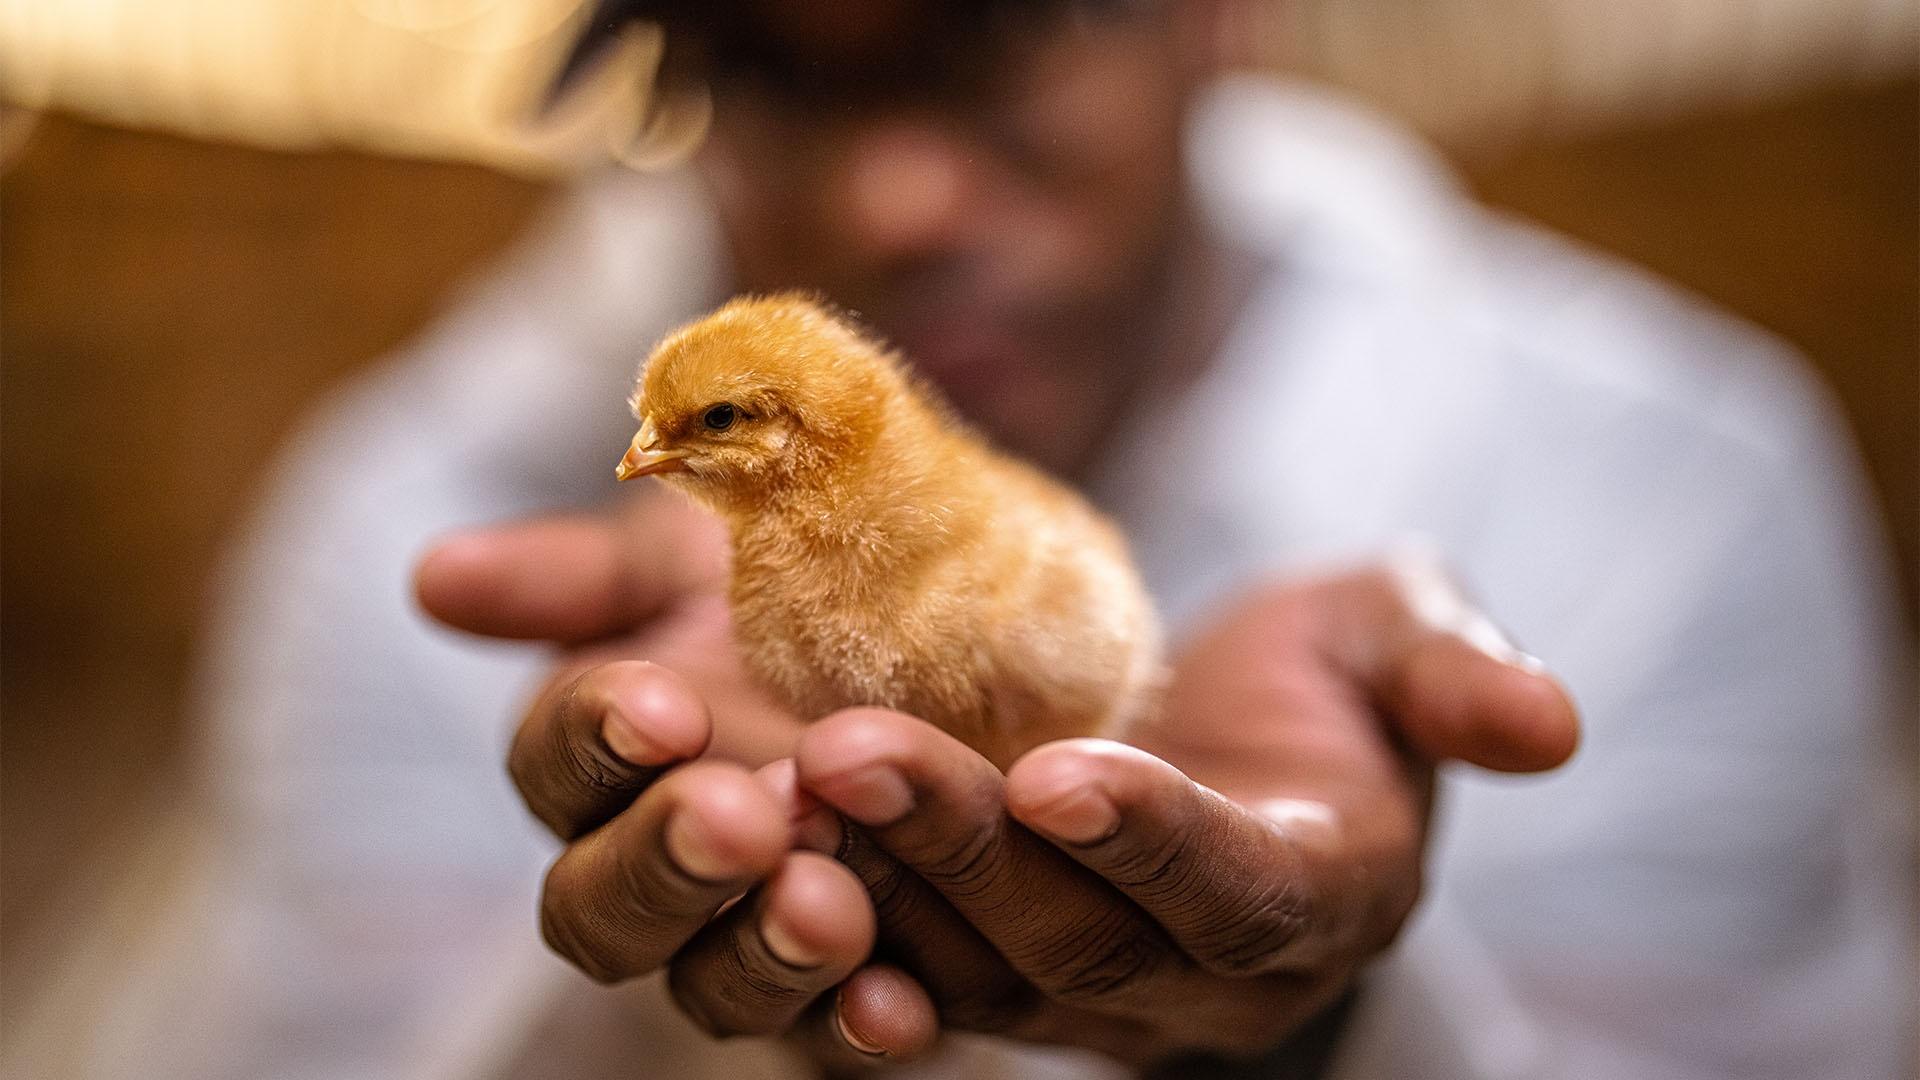 Shane holds a 4-day-old chick at a farm in Lucerne Valley, CA.